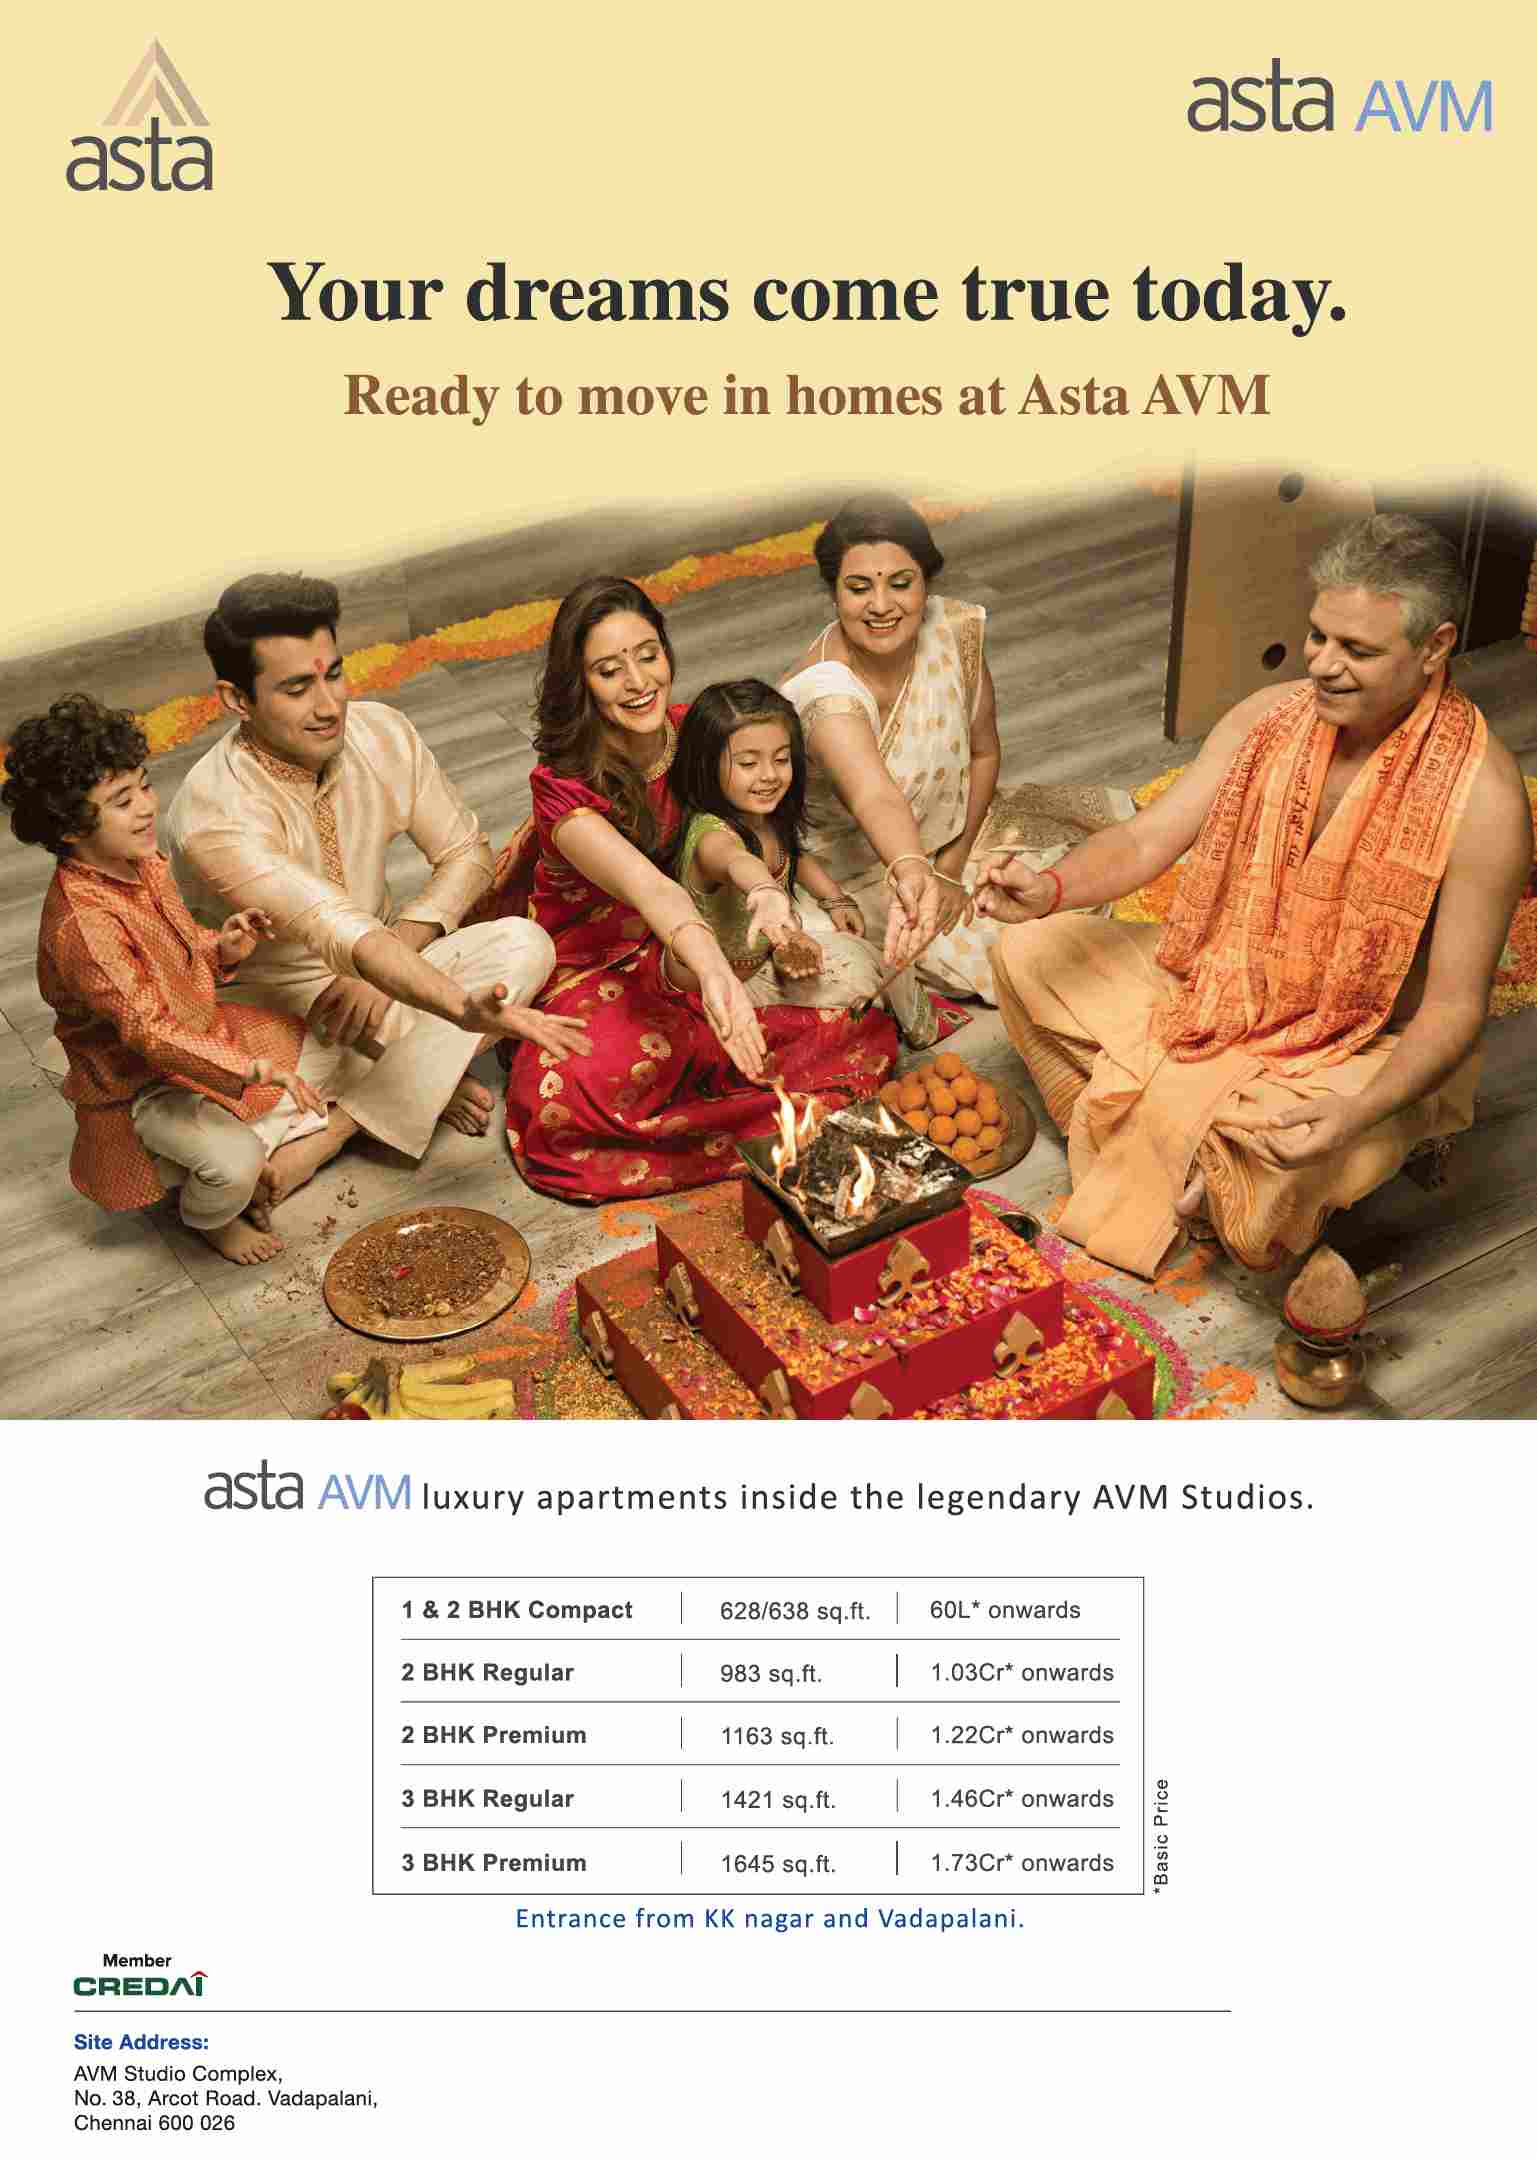 Book ready to move in homes at Asta Avm in Chennai